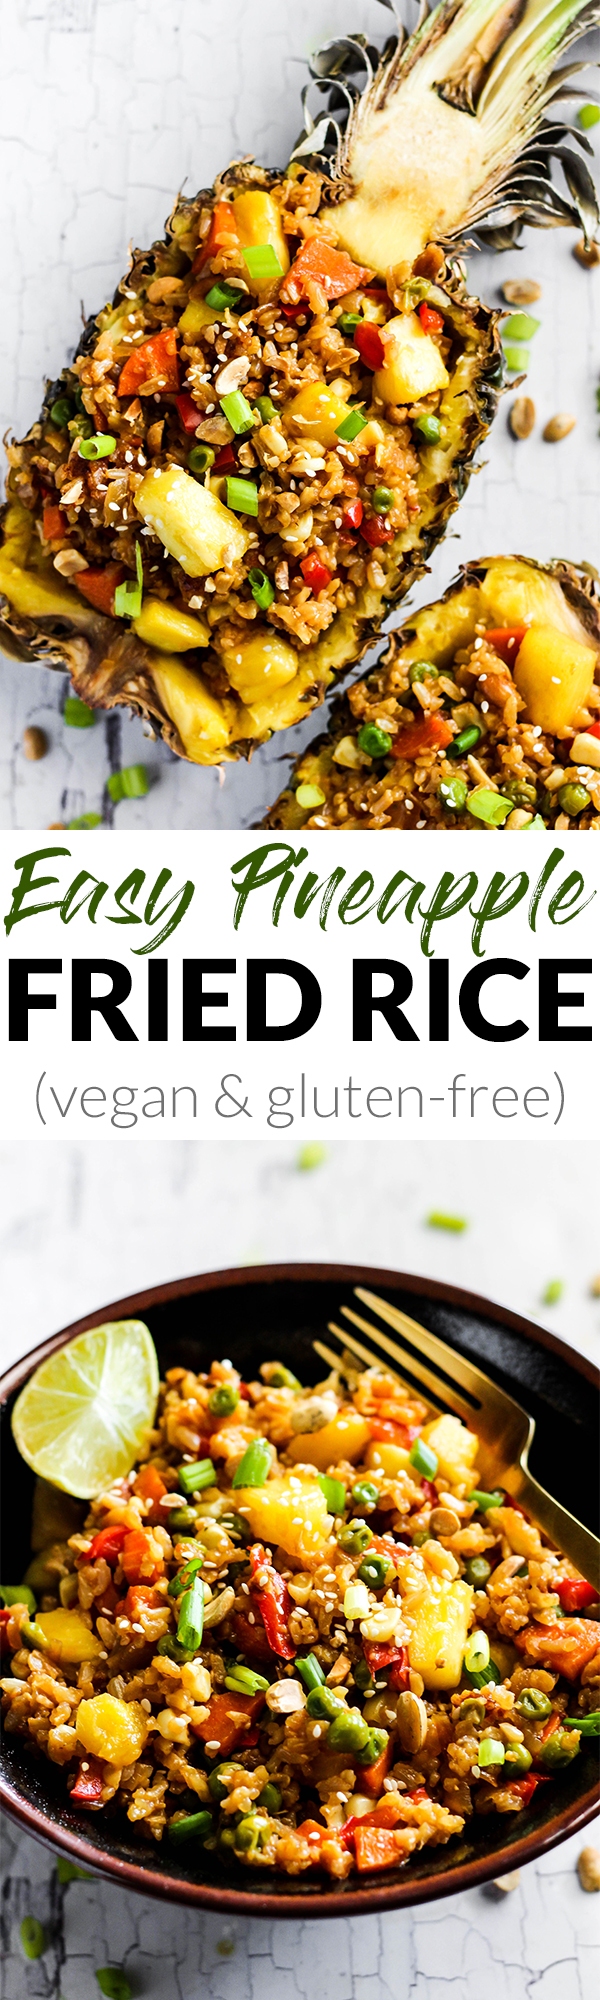 This Easy Pineapple Fried Rice is a fruity, wholesome version of your favorite take-out dish! It's a great weeknight meal that's vegan & gluten-free.